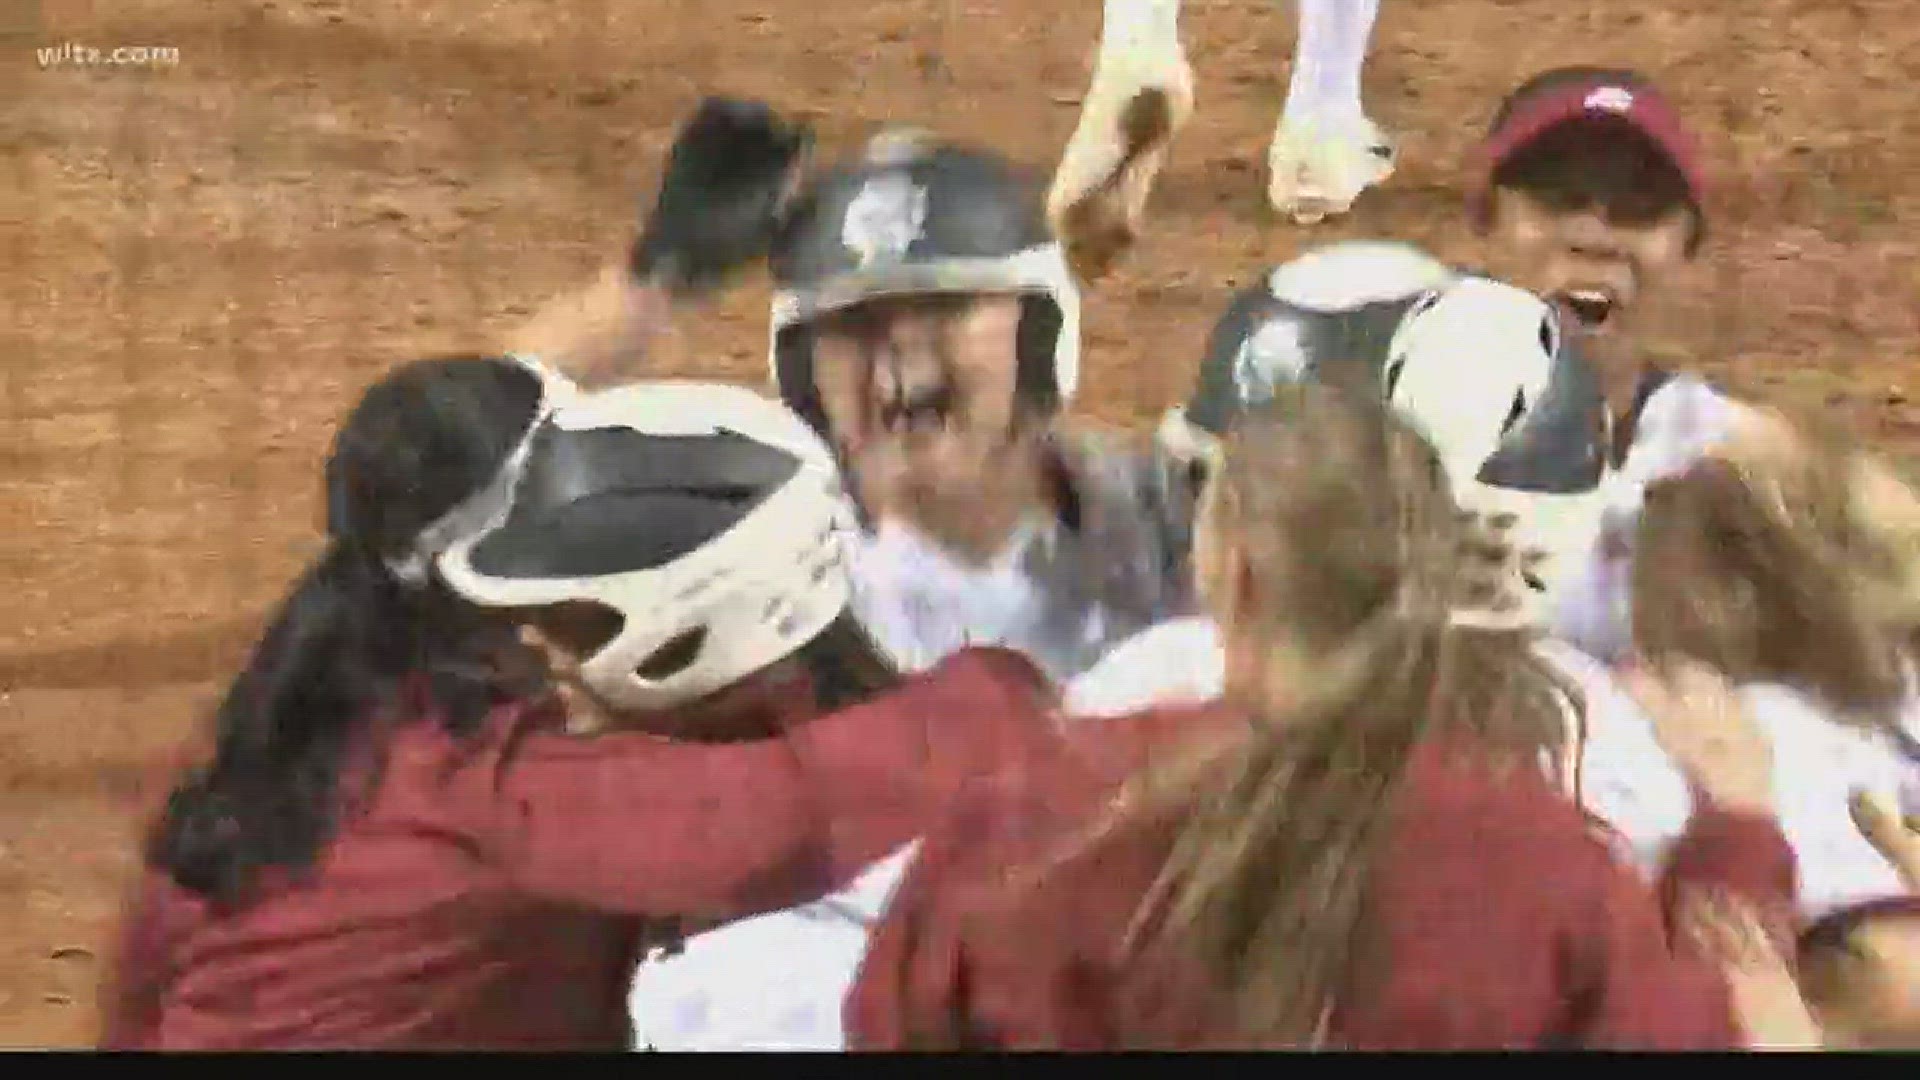 The USC softball team rallied from a 7-3 run deficit to stun Tennessee 8-7 in walk-off fashion.